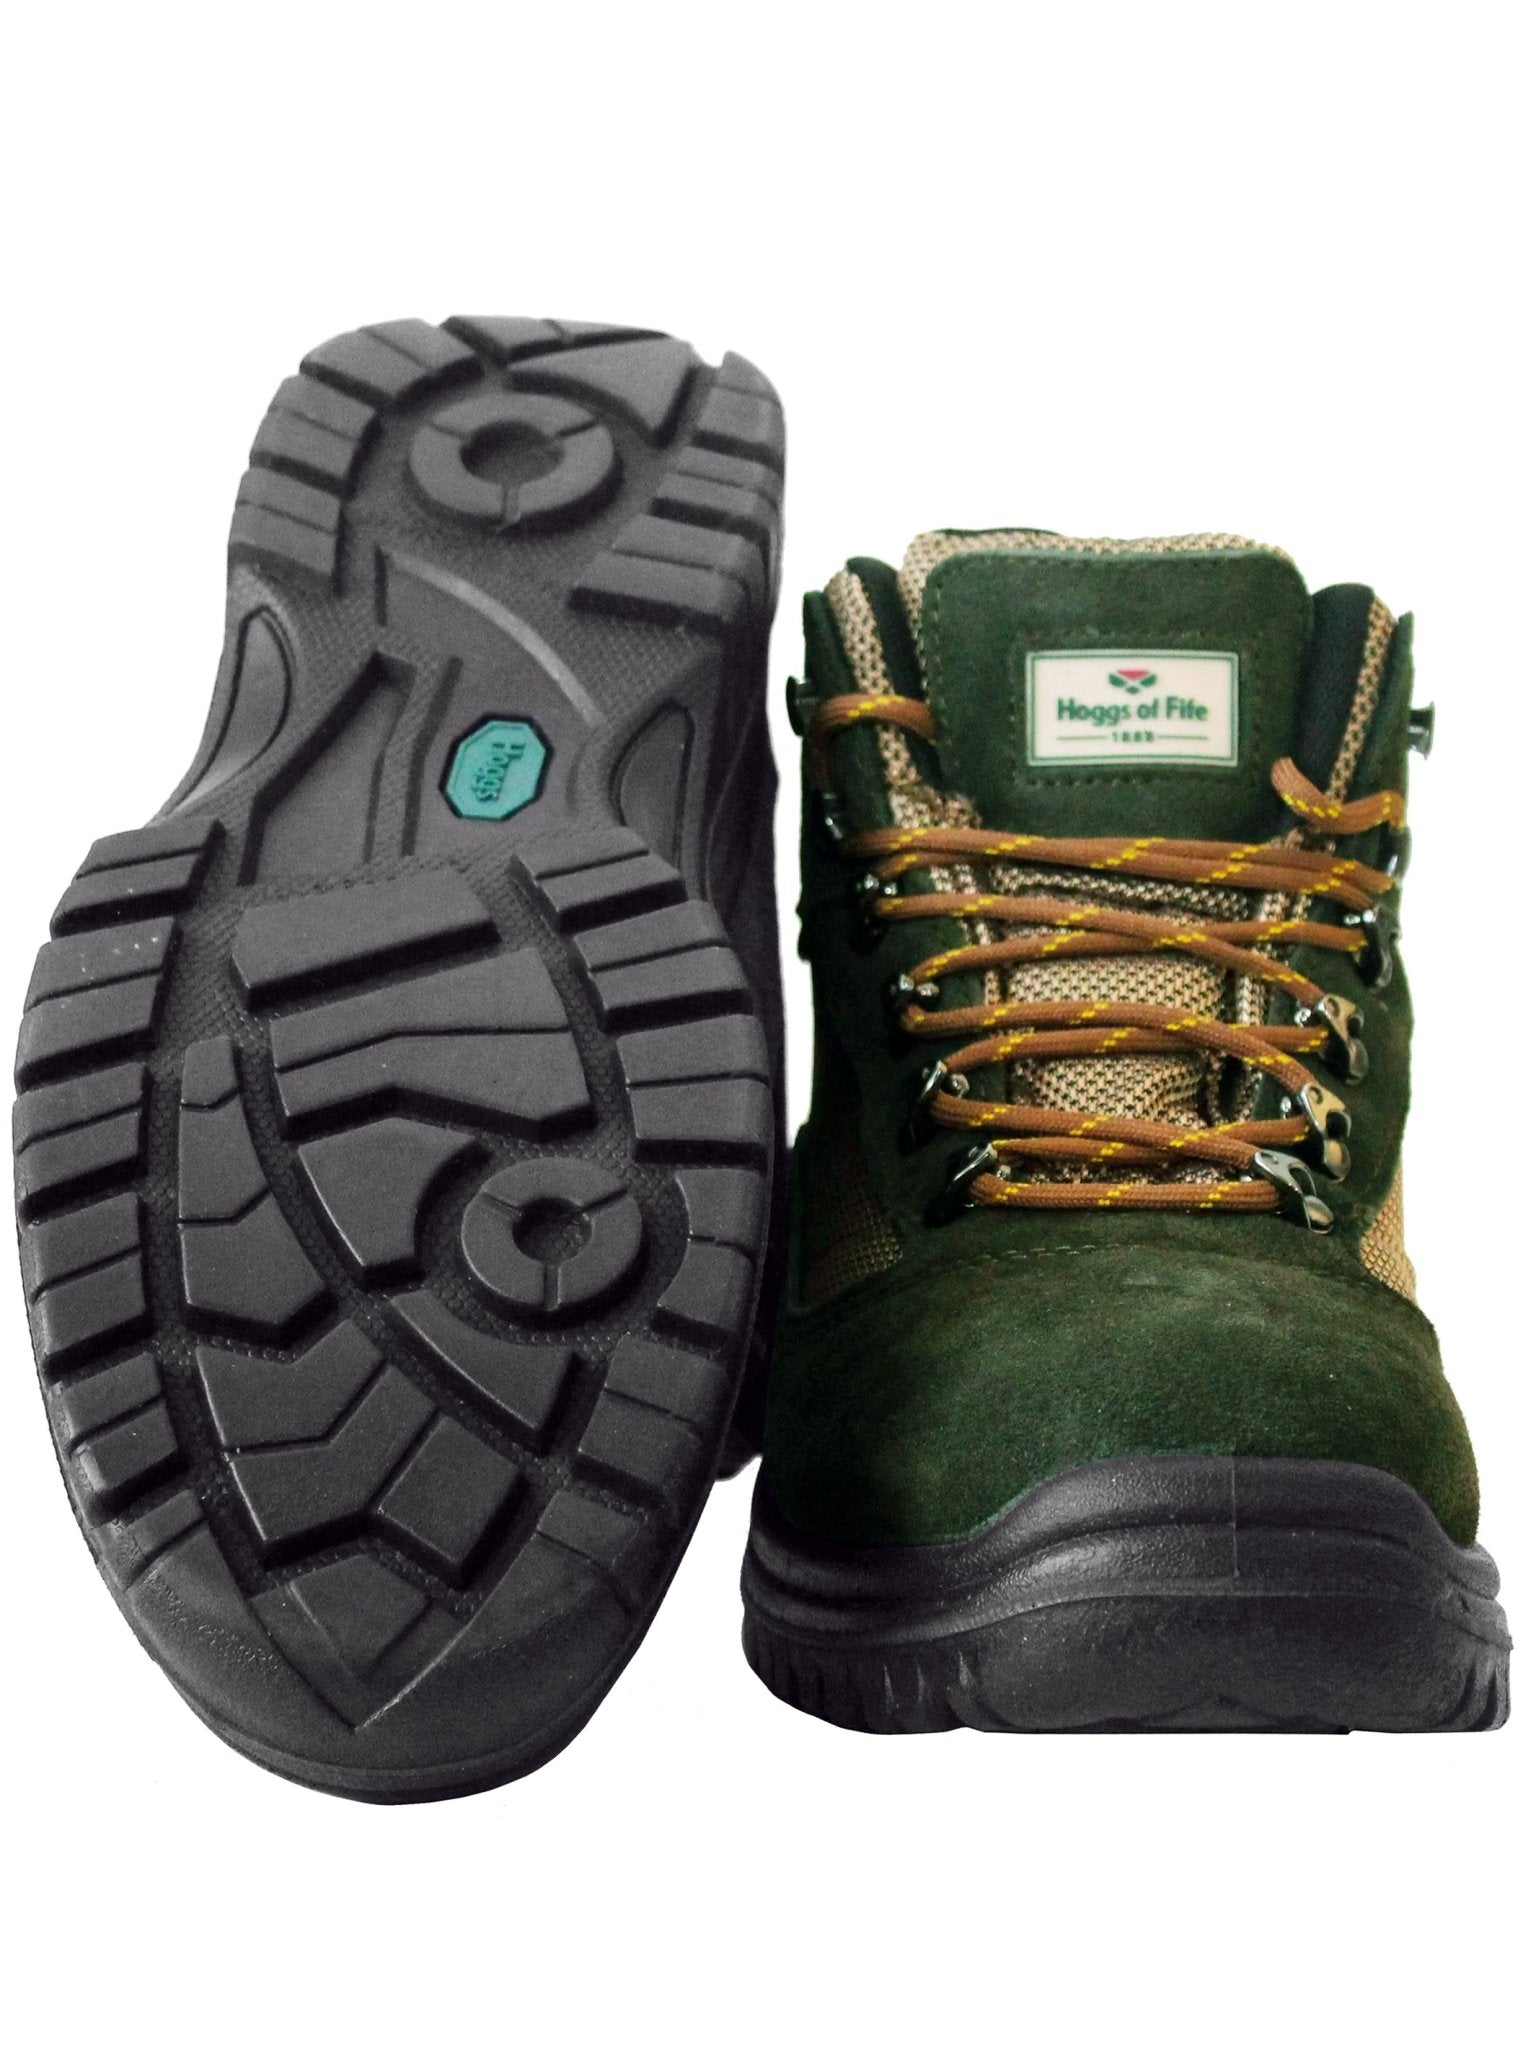 4elementsclothingHoggs of FifeHoggs of Fife - Rambler Waterproof boots, Hiking boot, Lightweight breathable bootsBootsRAMB/NY/040